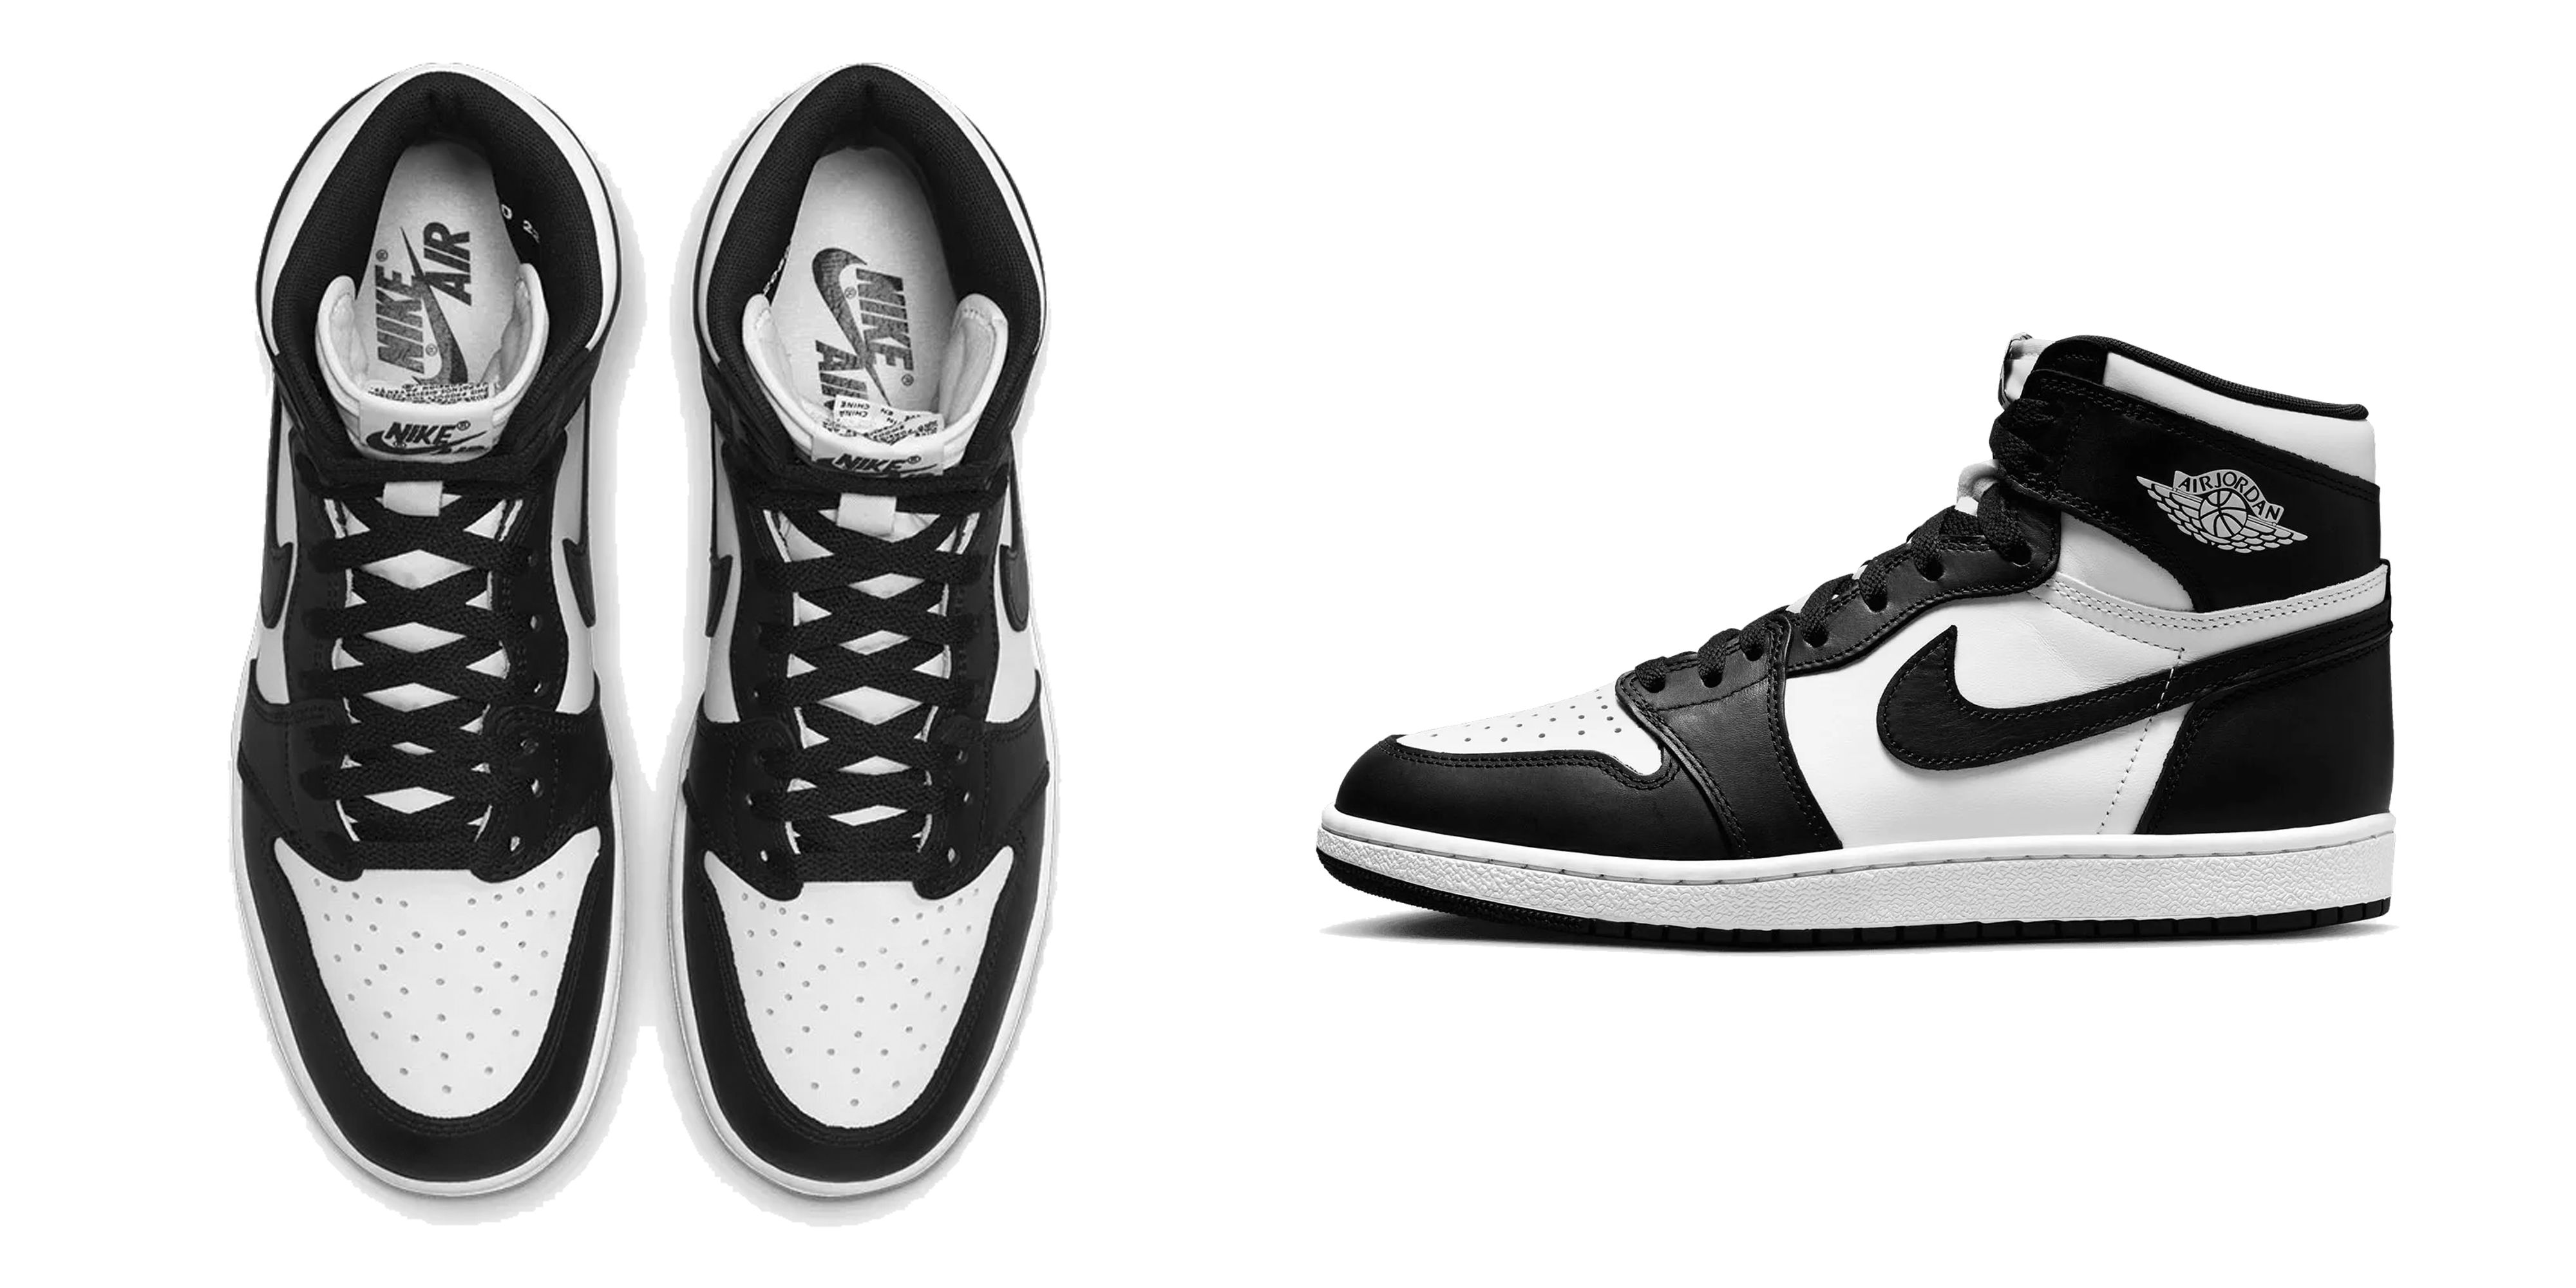 The Air Jordan 1 High ‘85 ‘Black/White’ Is About to Drop. Here’s